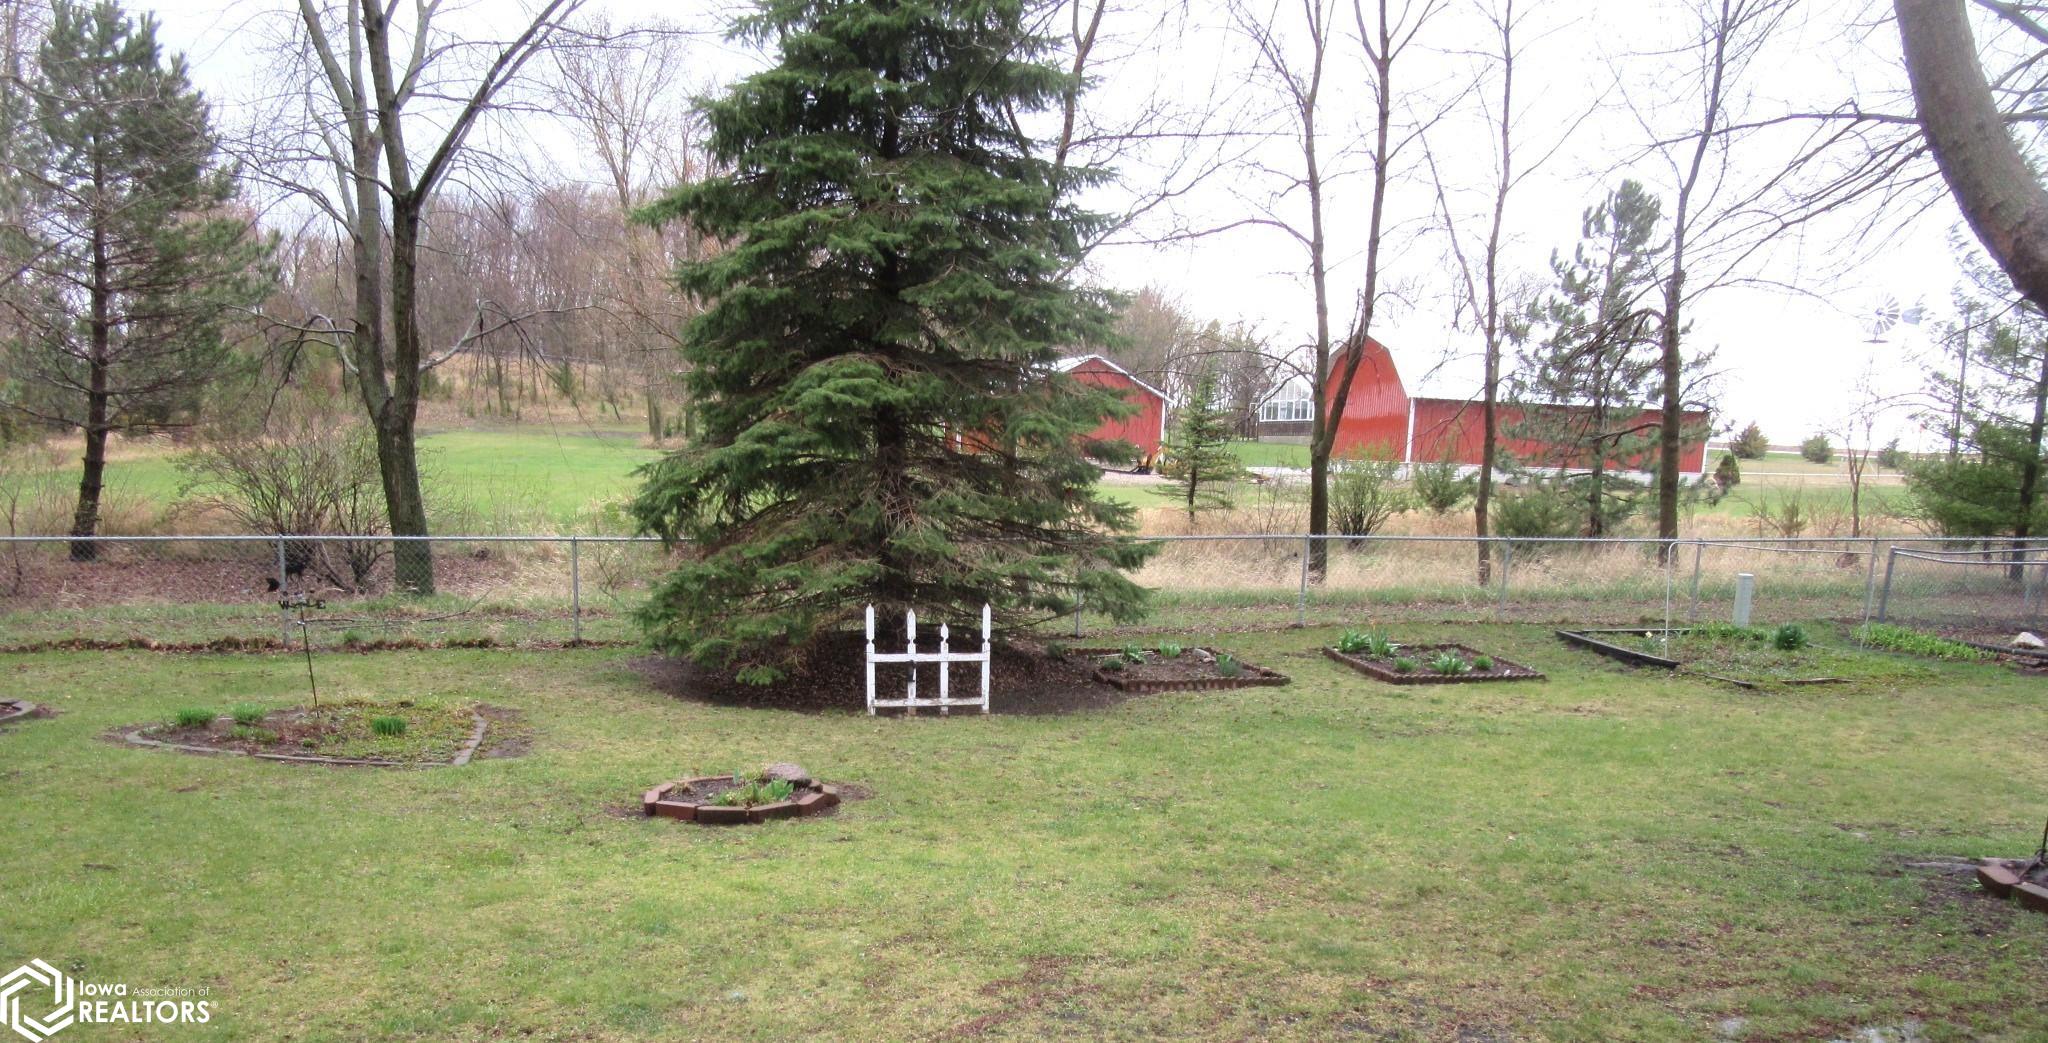 Raised Beds and mature trees.  Some of fence is chain link.